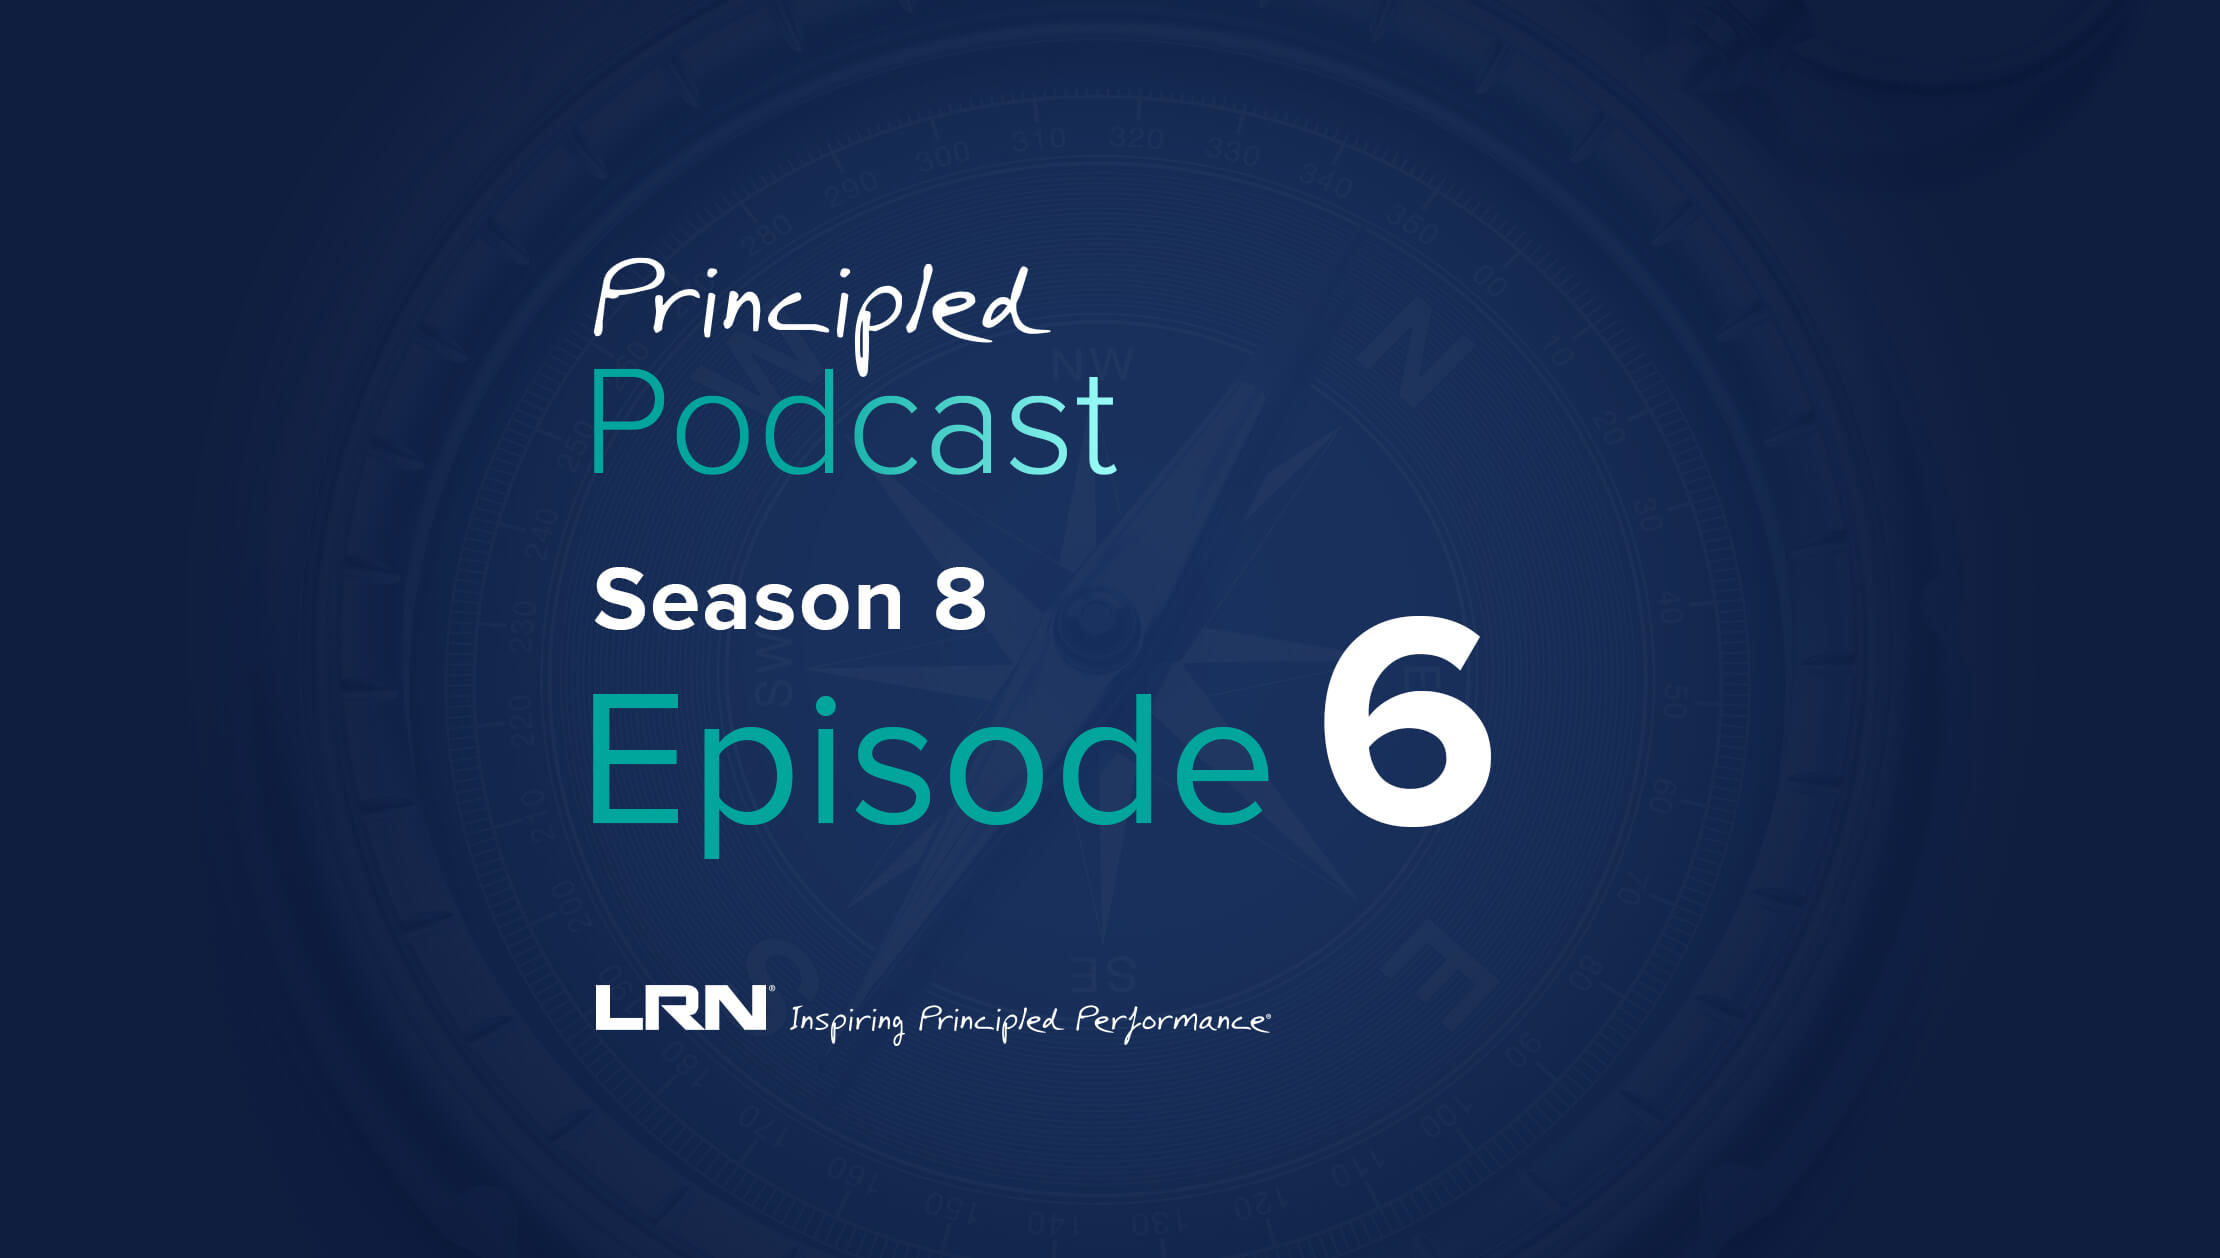 LRN Principled Podcast Season 8 Episode 6 – How to bring compliance benchmarking to life